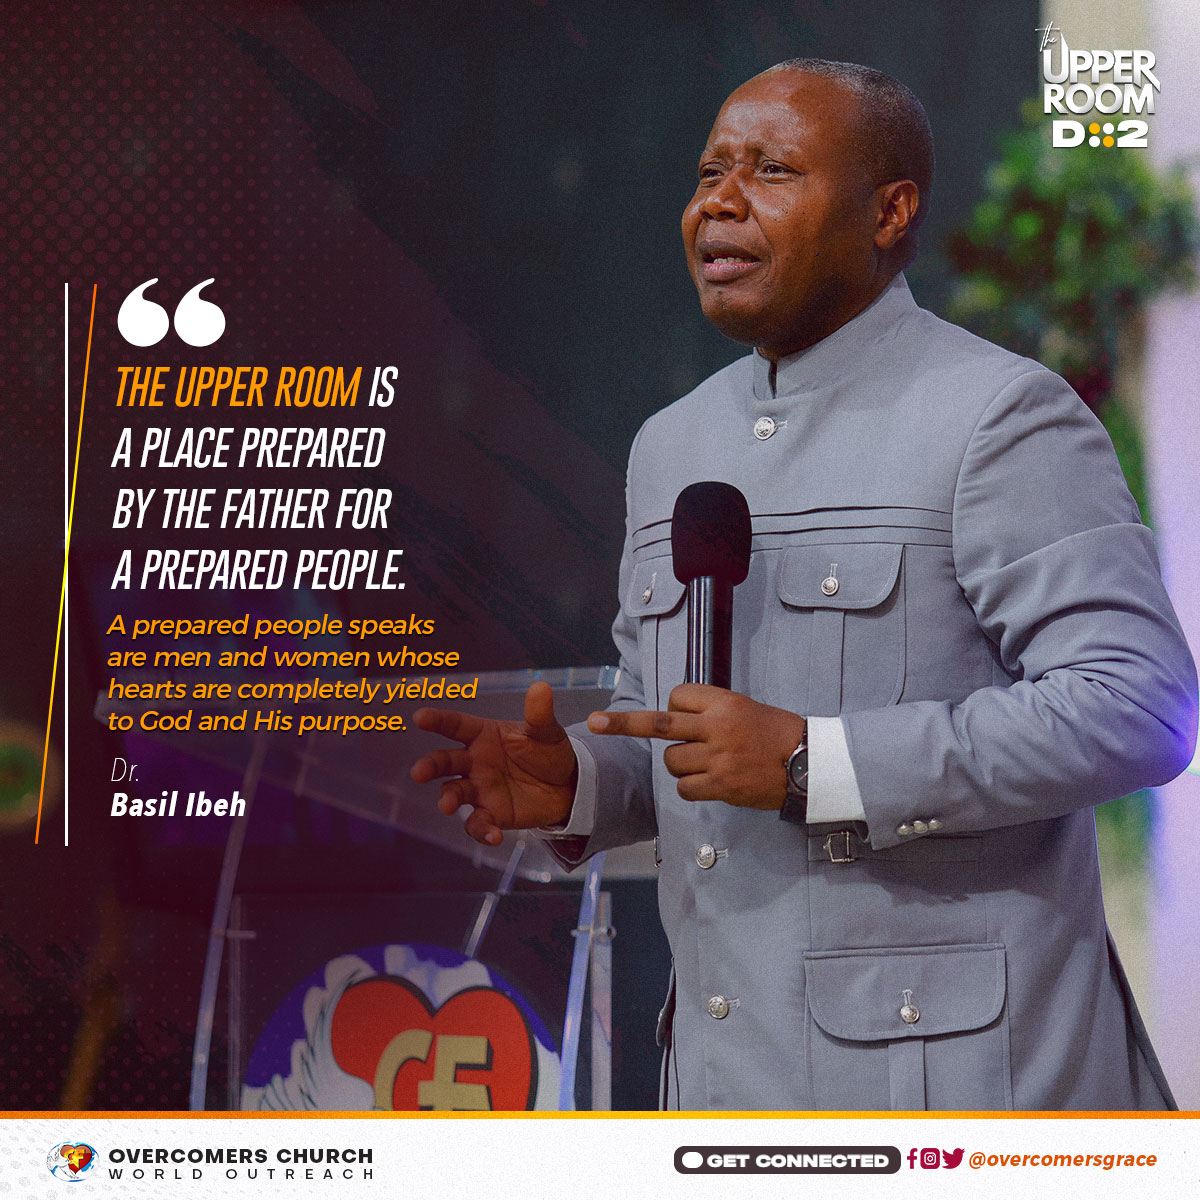 The Upper Room is a place prepared by the Father for a prepared people. 
It is a place for people who want to receive responsibility for Kingdom assignment.
- Dr. Basil Ibeh
'Pursue Your Own Upper Room Experience'
#OvercomersChurch #HSFC2023 #TheUpperRoom